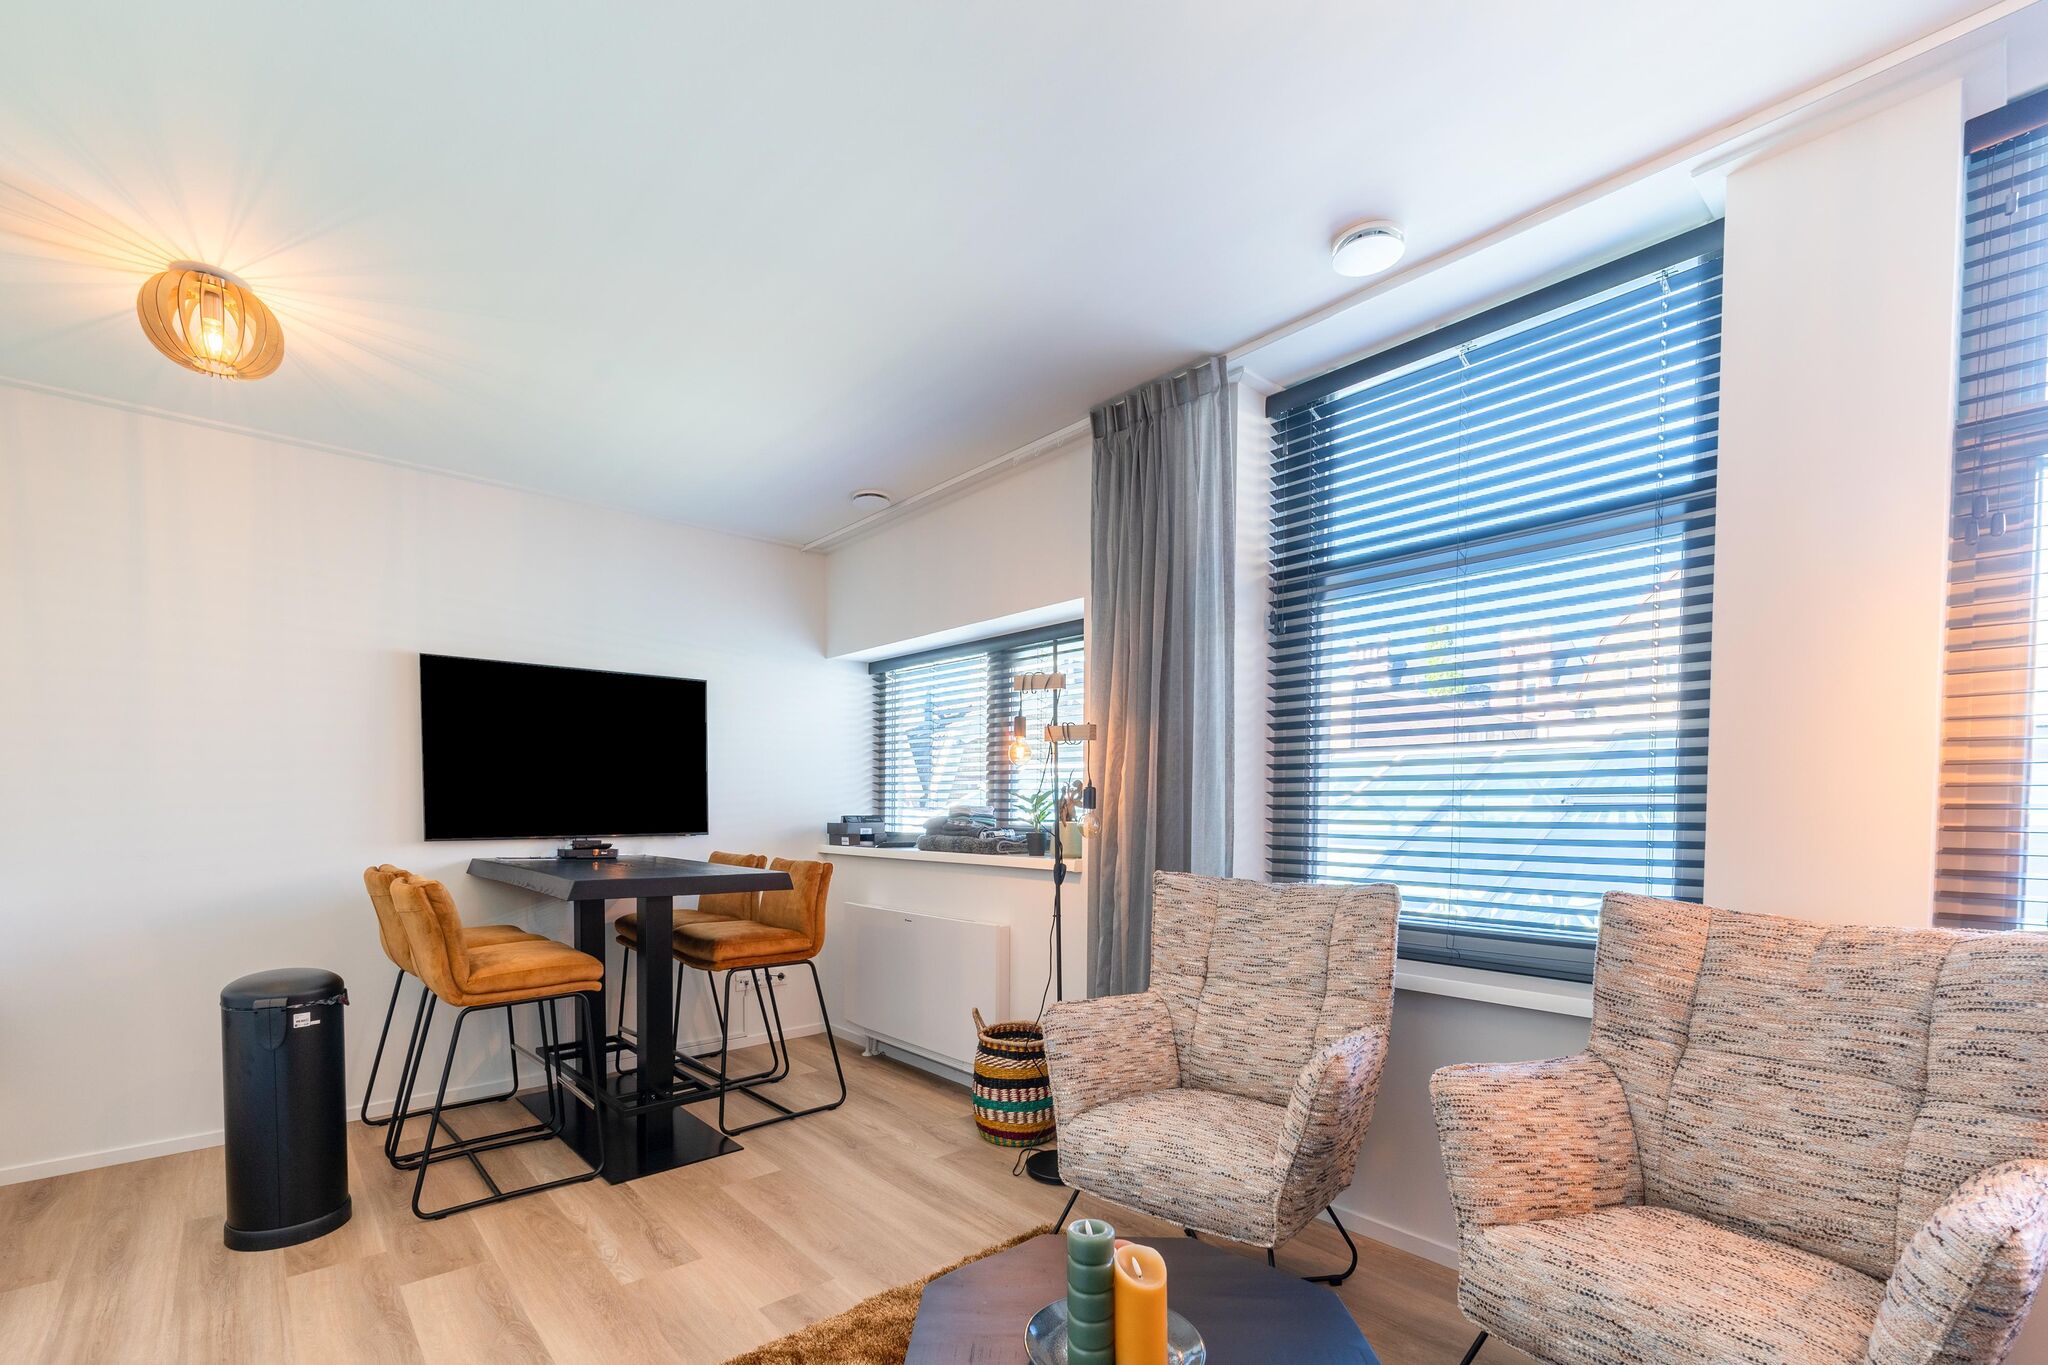 Renovated apartment in the center of Sneek